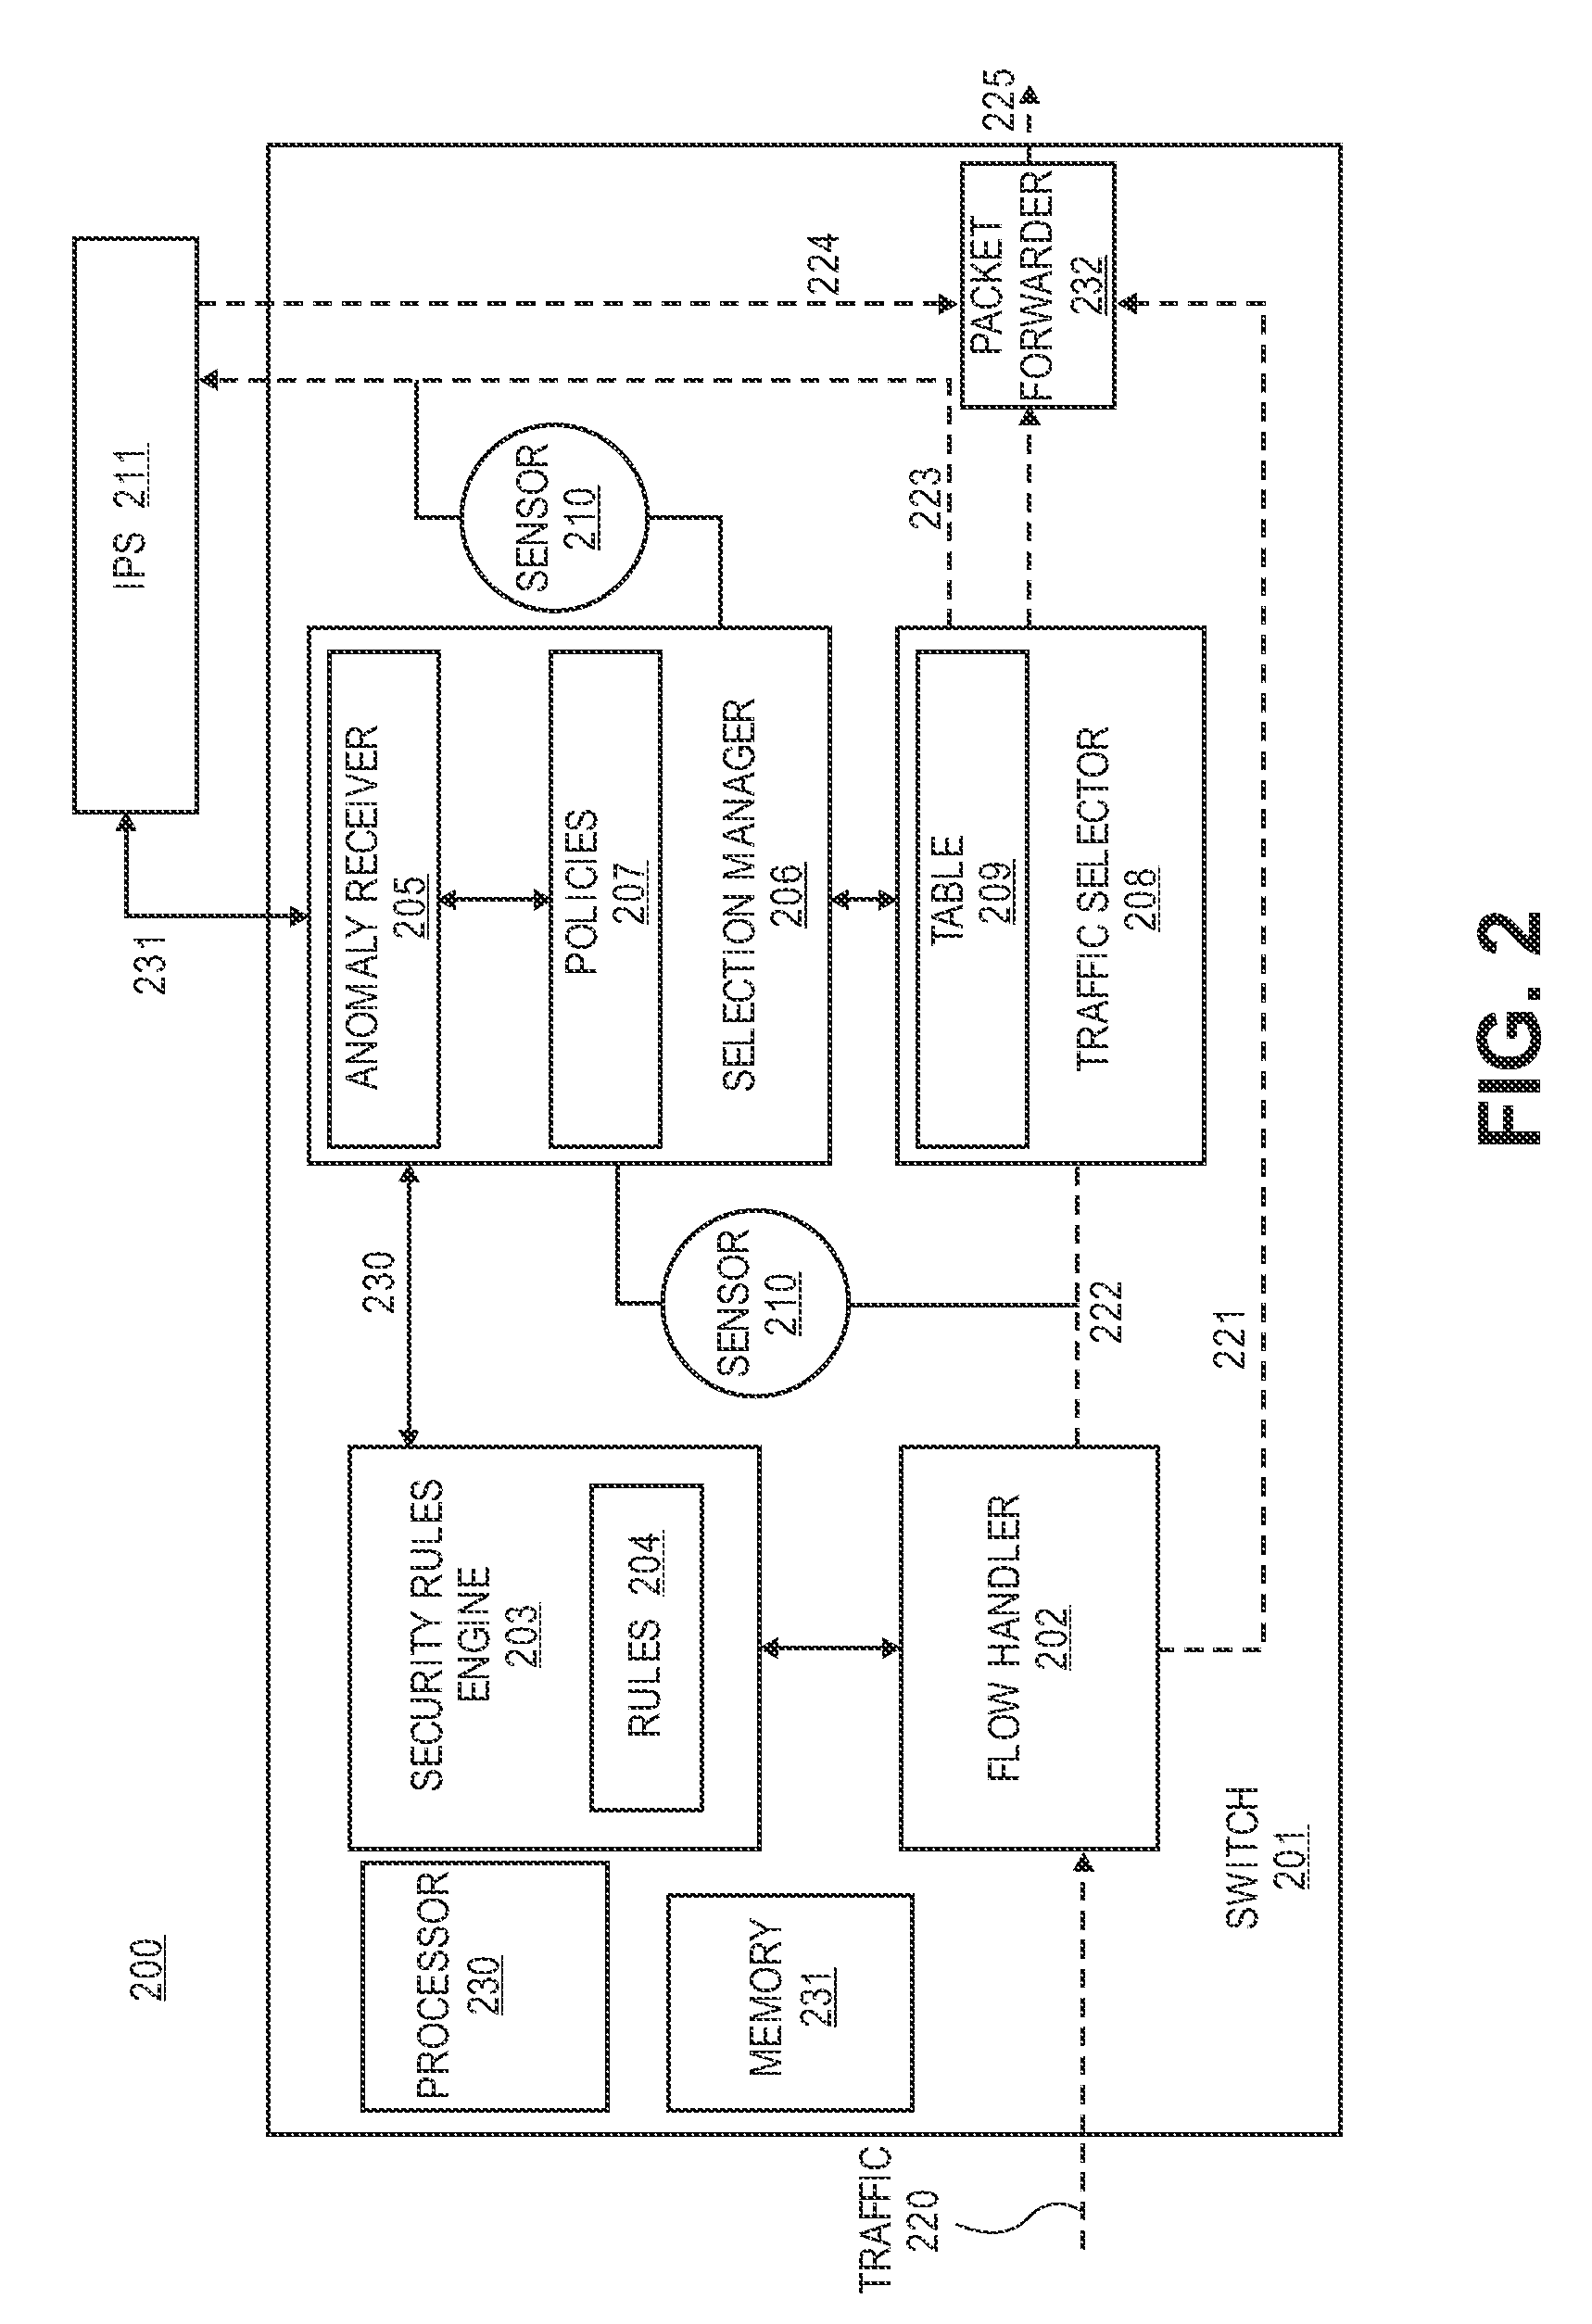 Method and mechanism for port redirects in a network switch